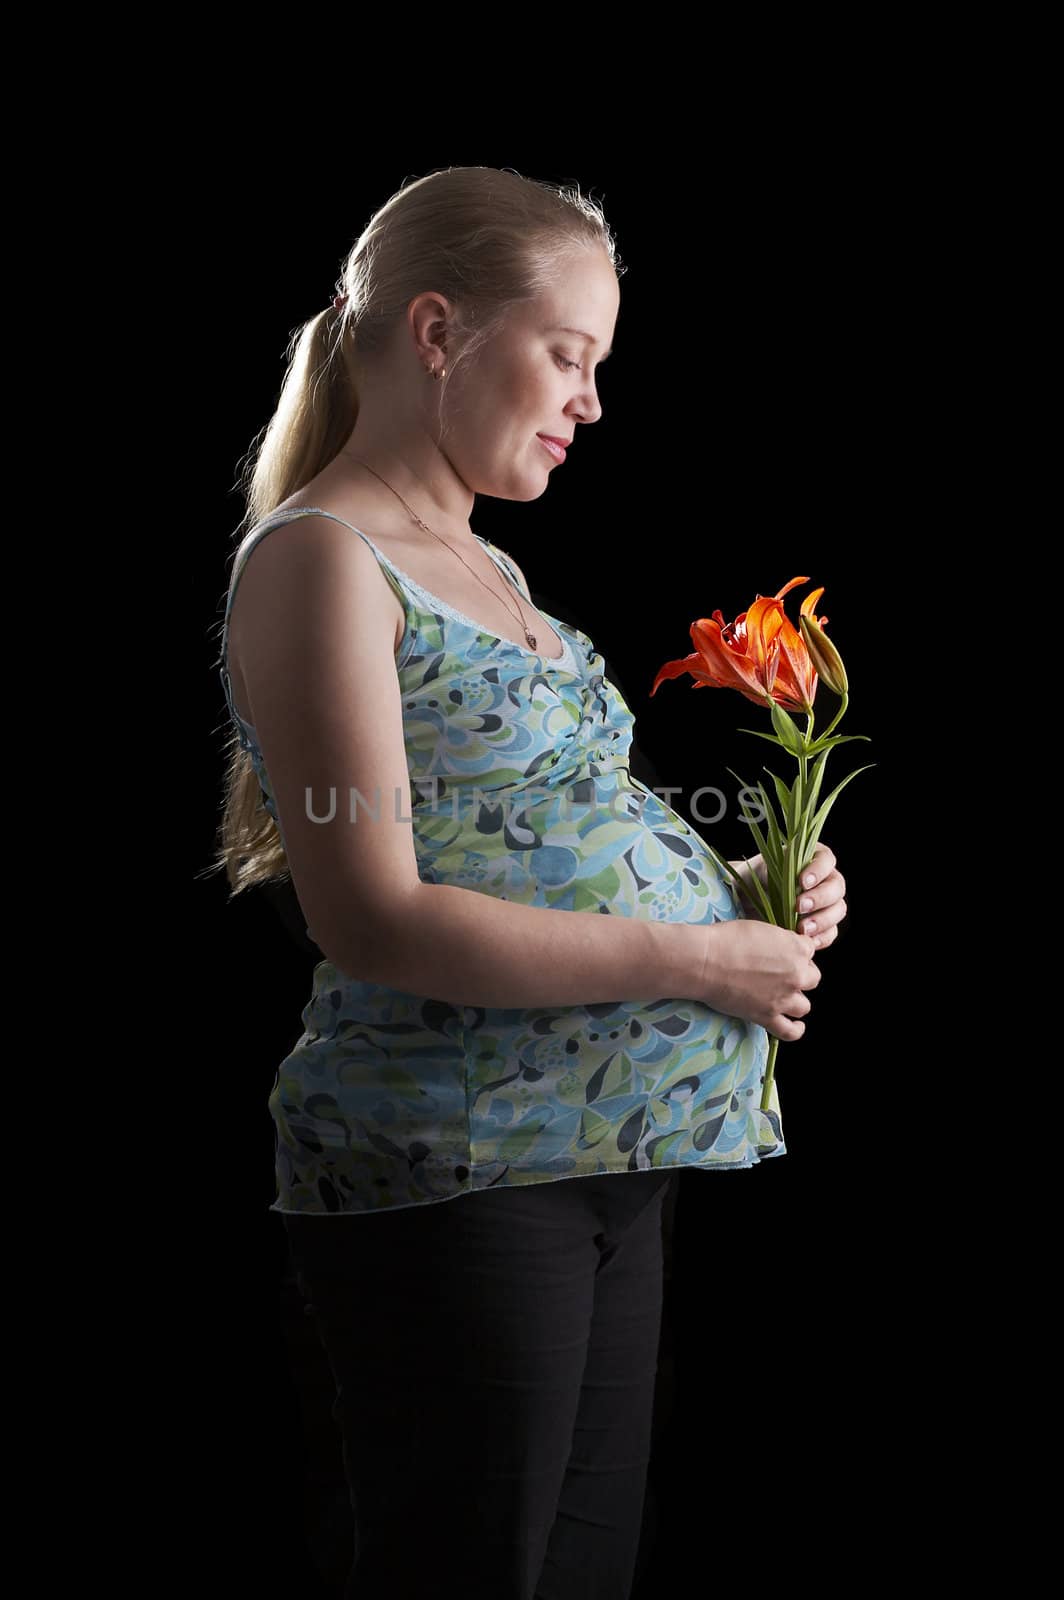 A pregnant young woman holding flower on a black background.